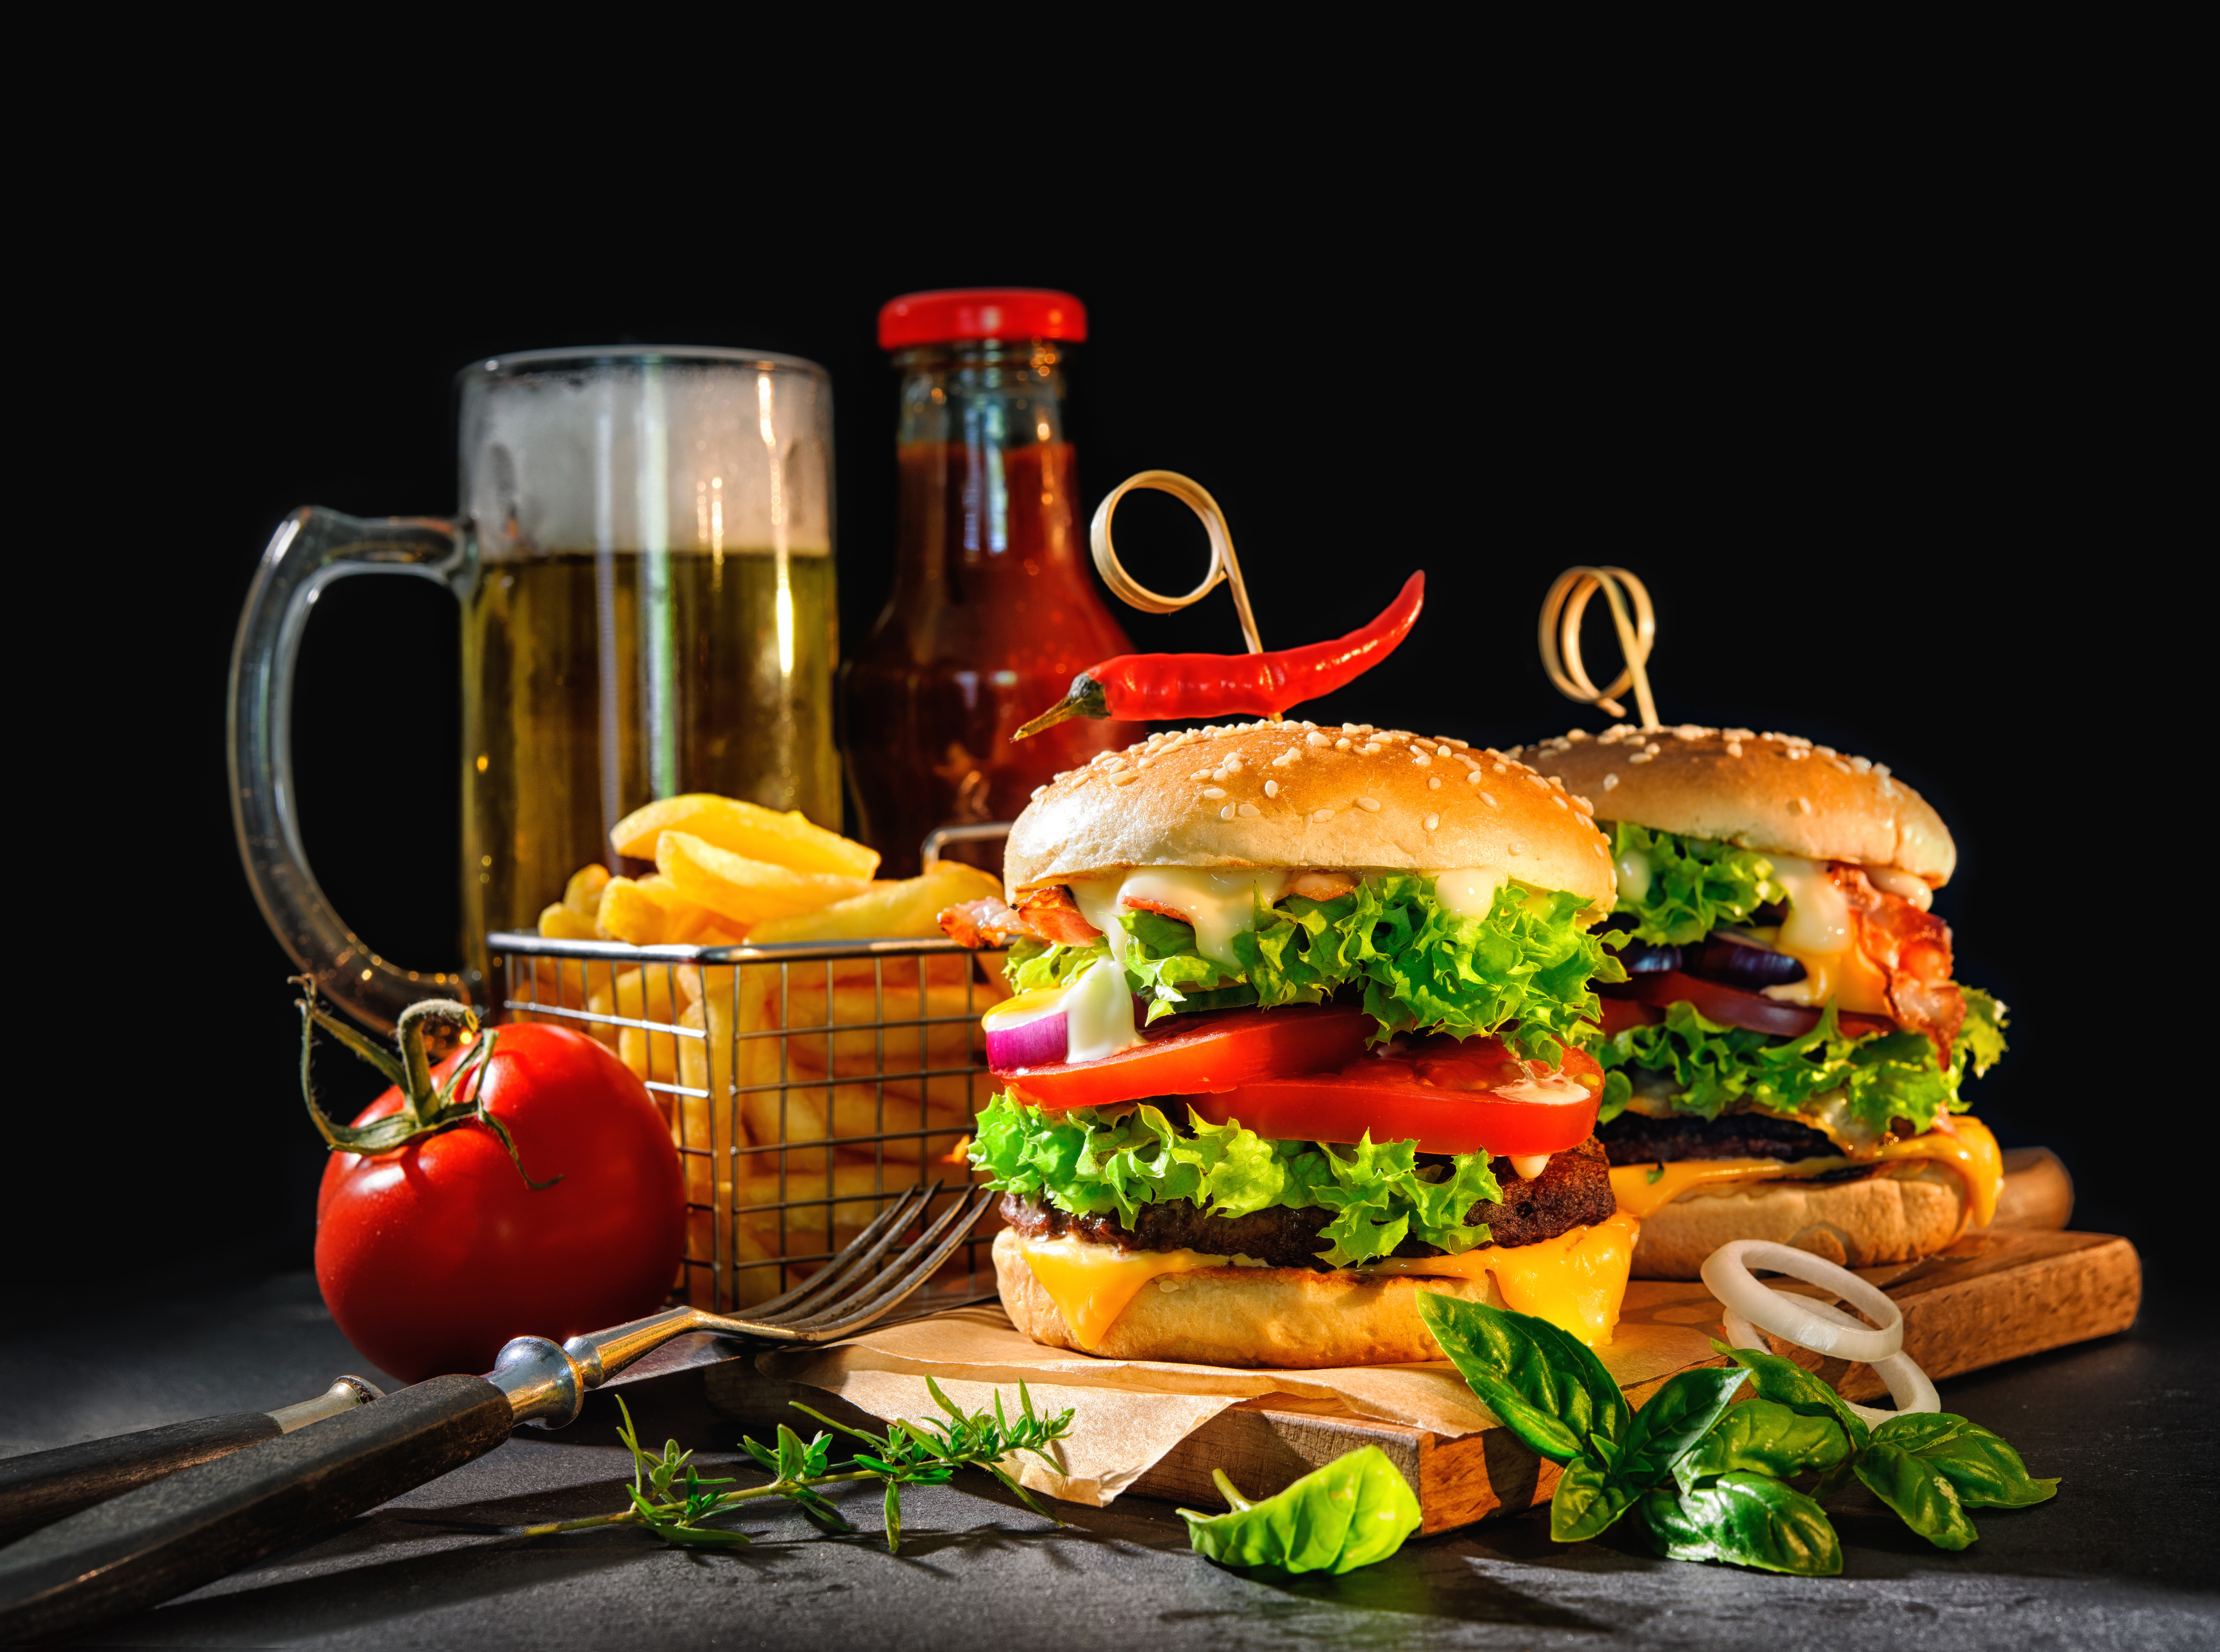 Beer Burger French Fries Still Life Tomato 6048x4500